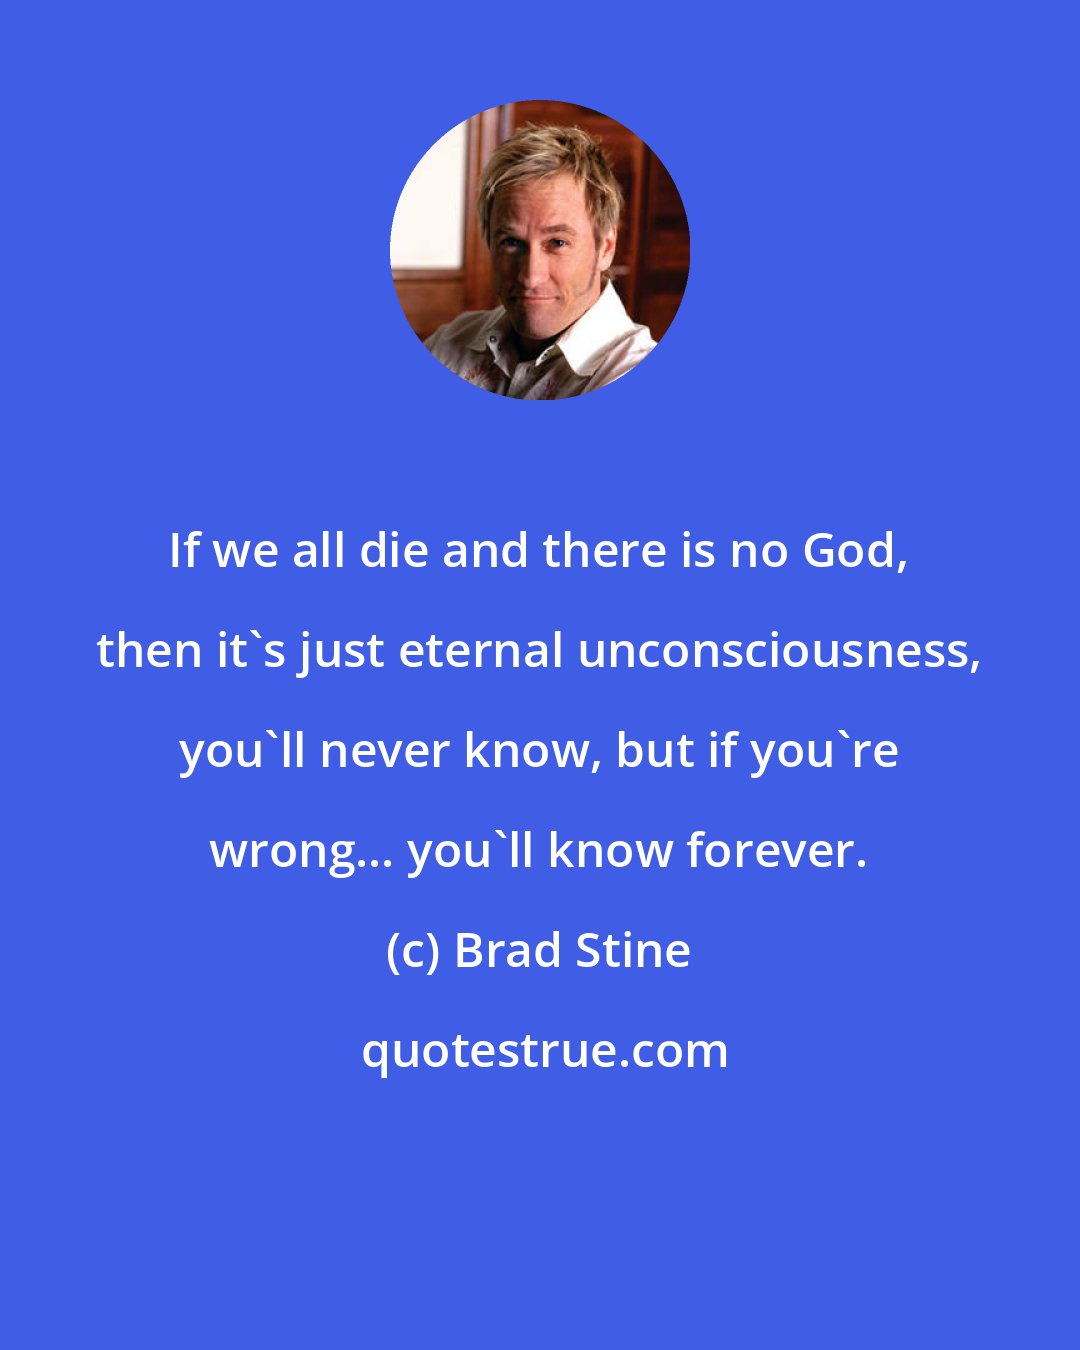 Brad Stine: If we all die and there is no God, then it's just eternal unconsciousness, you'll never know, but if you're wrong... you'll know forever.